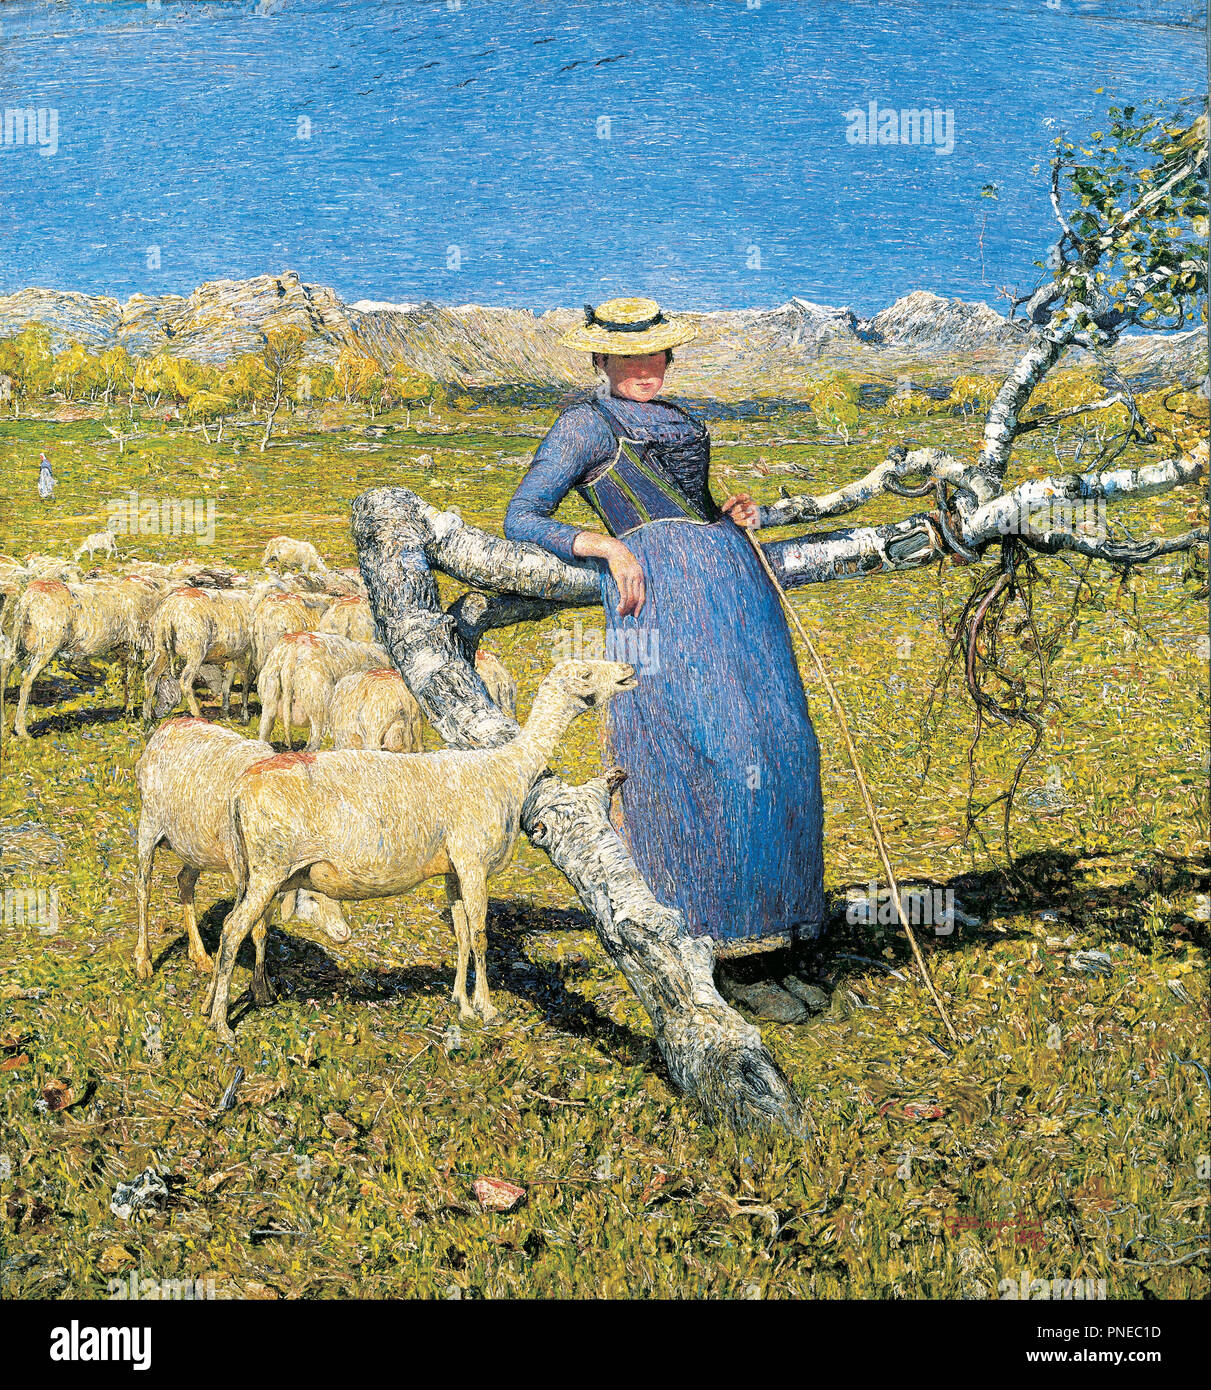 High Noon in the Alps. Date/Period: 1892. Painting. Oil on canvas. Height: 860 mm (33.85 in); Width: 800 mm (31.49 in). Author: GIOVANNI SEGANTINI. SEGANTINI, GIOVANNI. Stock Photo